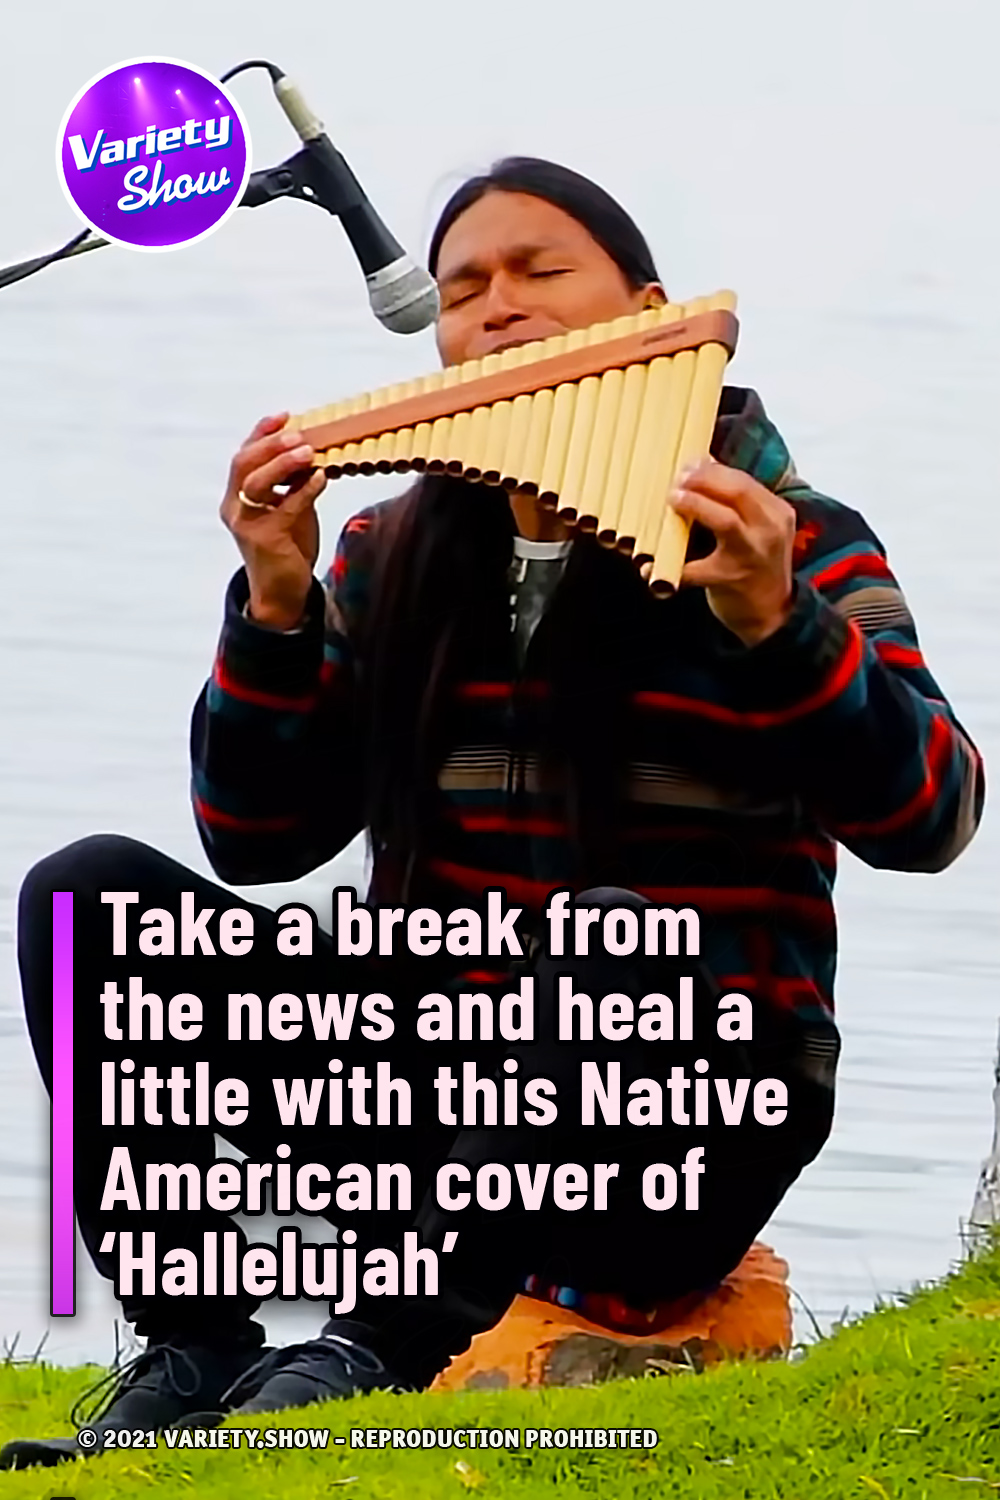 Take a break from the news and heal a little with this Native American cover of ‘Hallelujah’